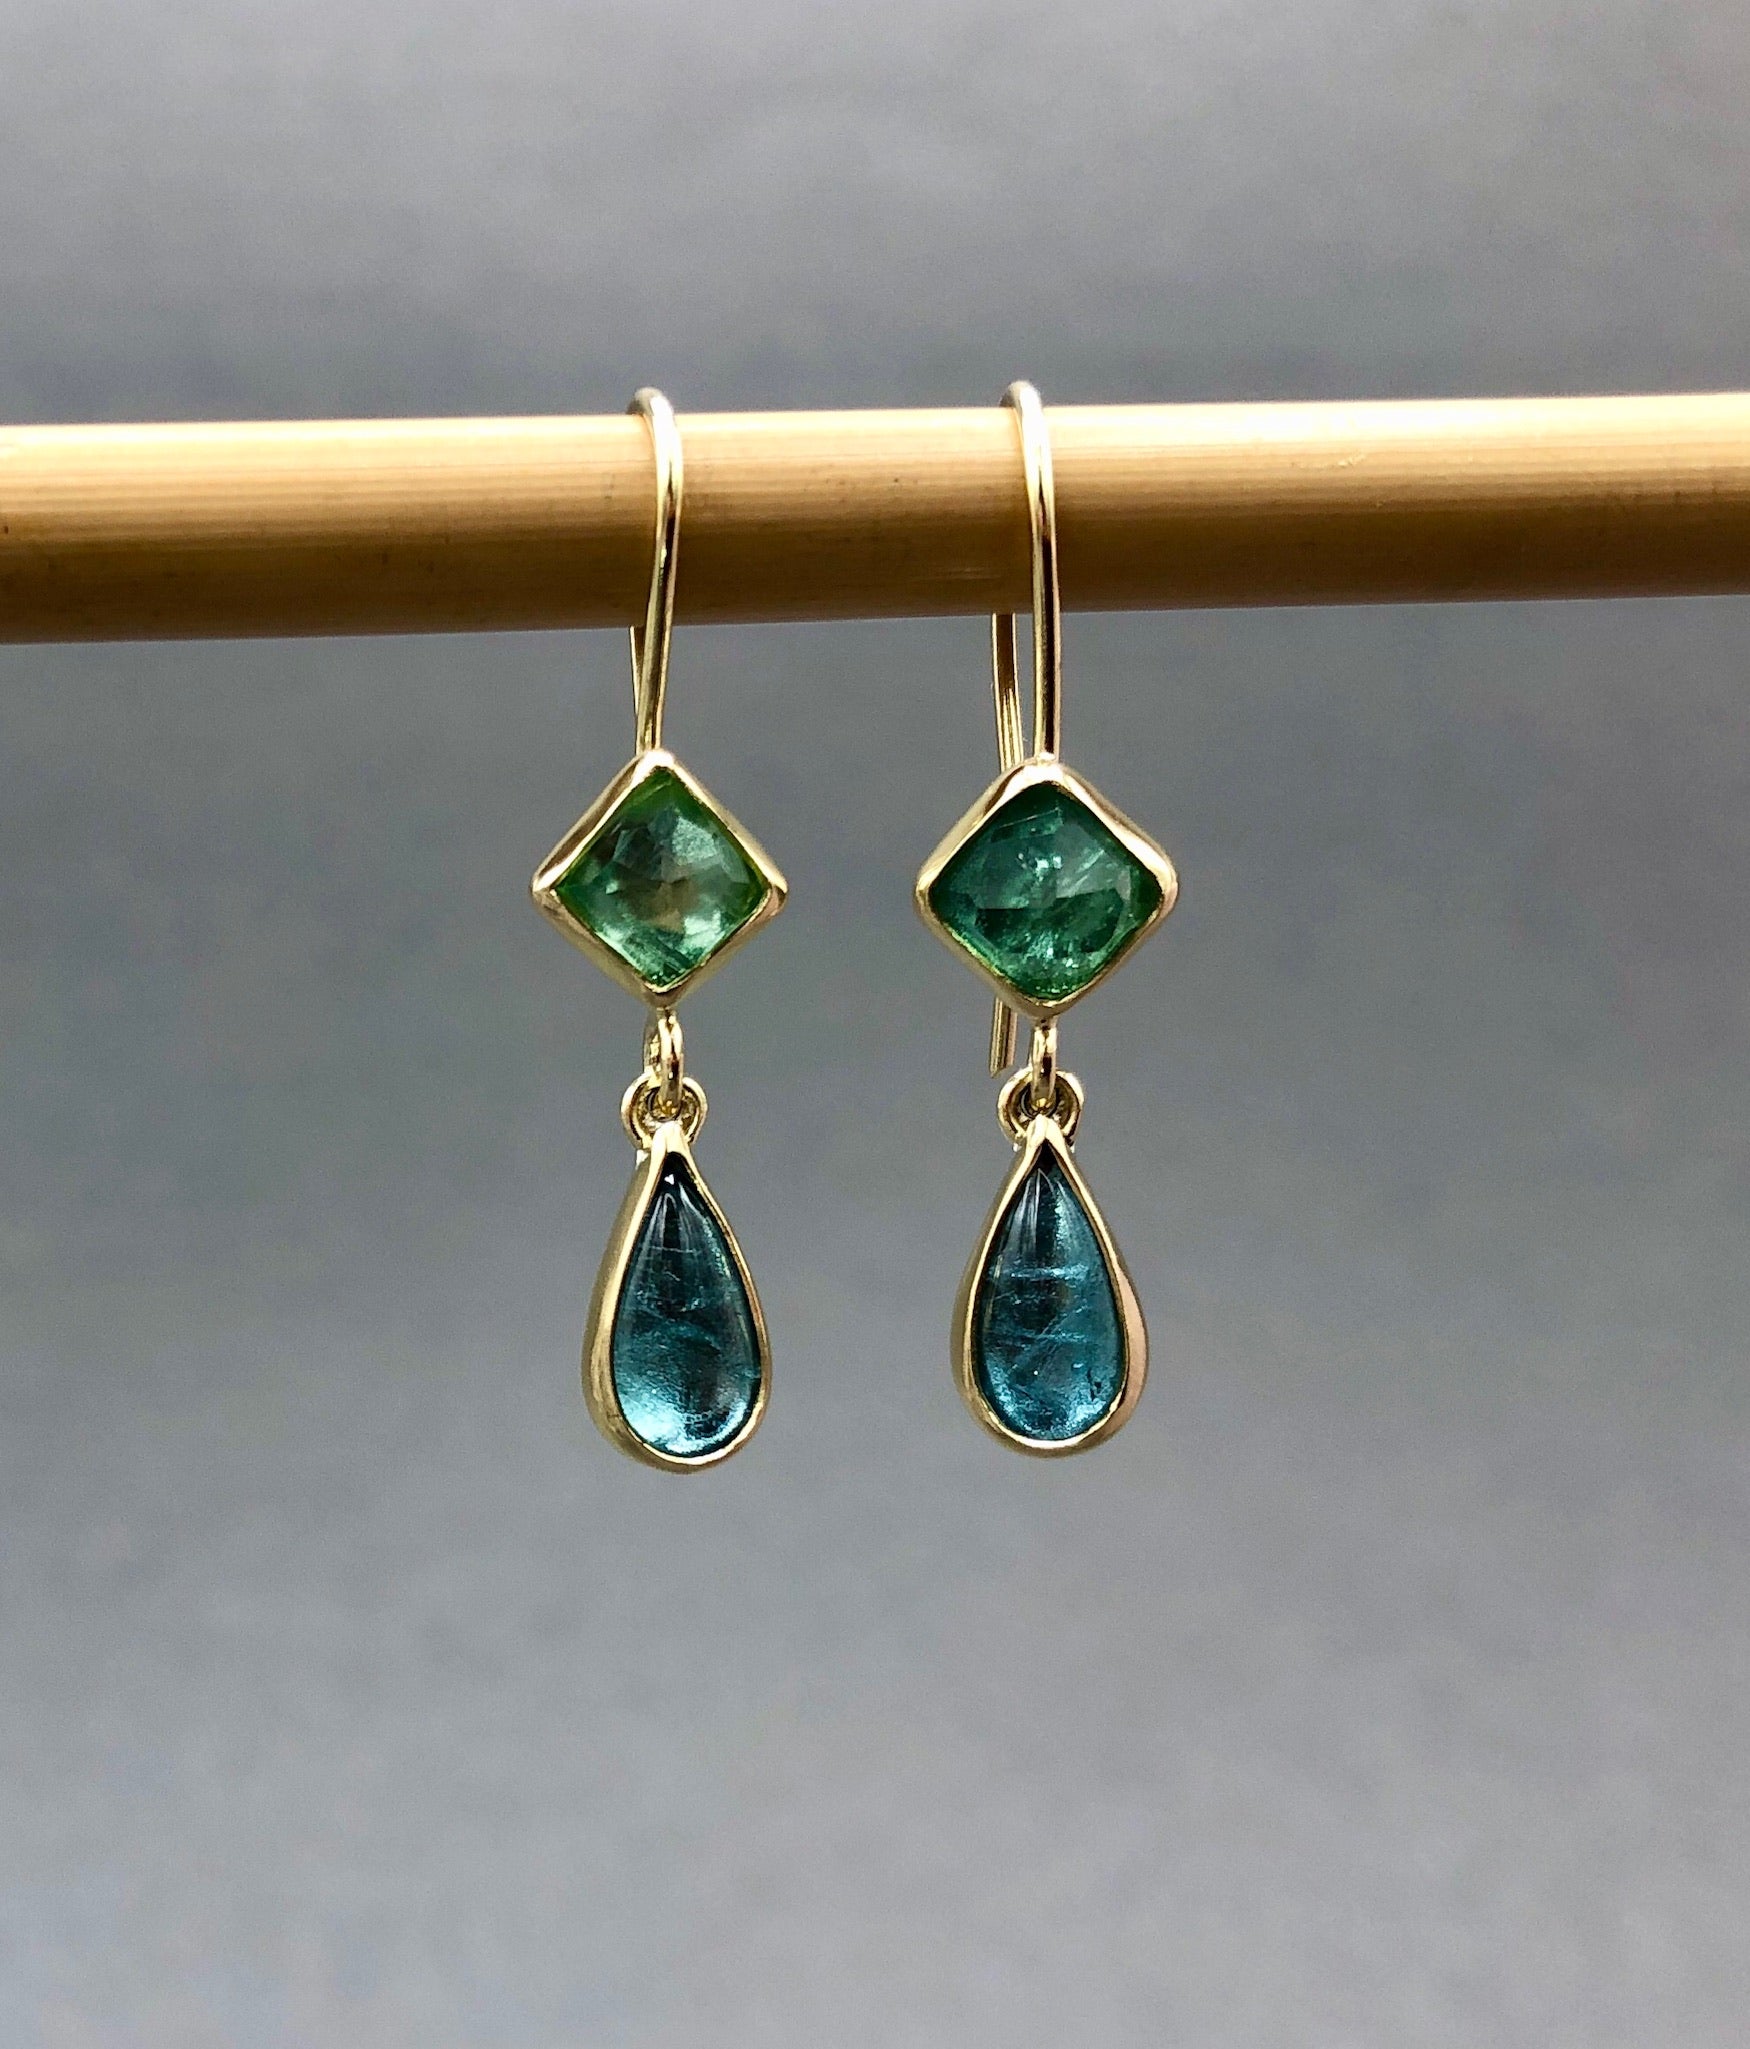 Natural Stone Crystal Druzy Earrings Blue/Green / Round / 14K Gold Filled